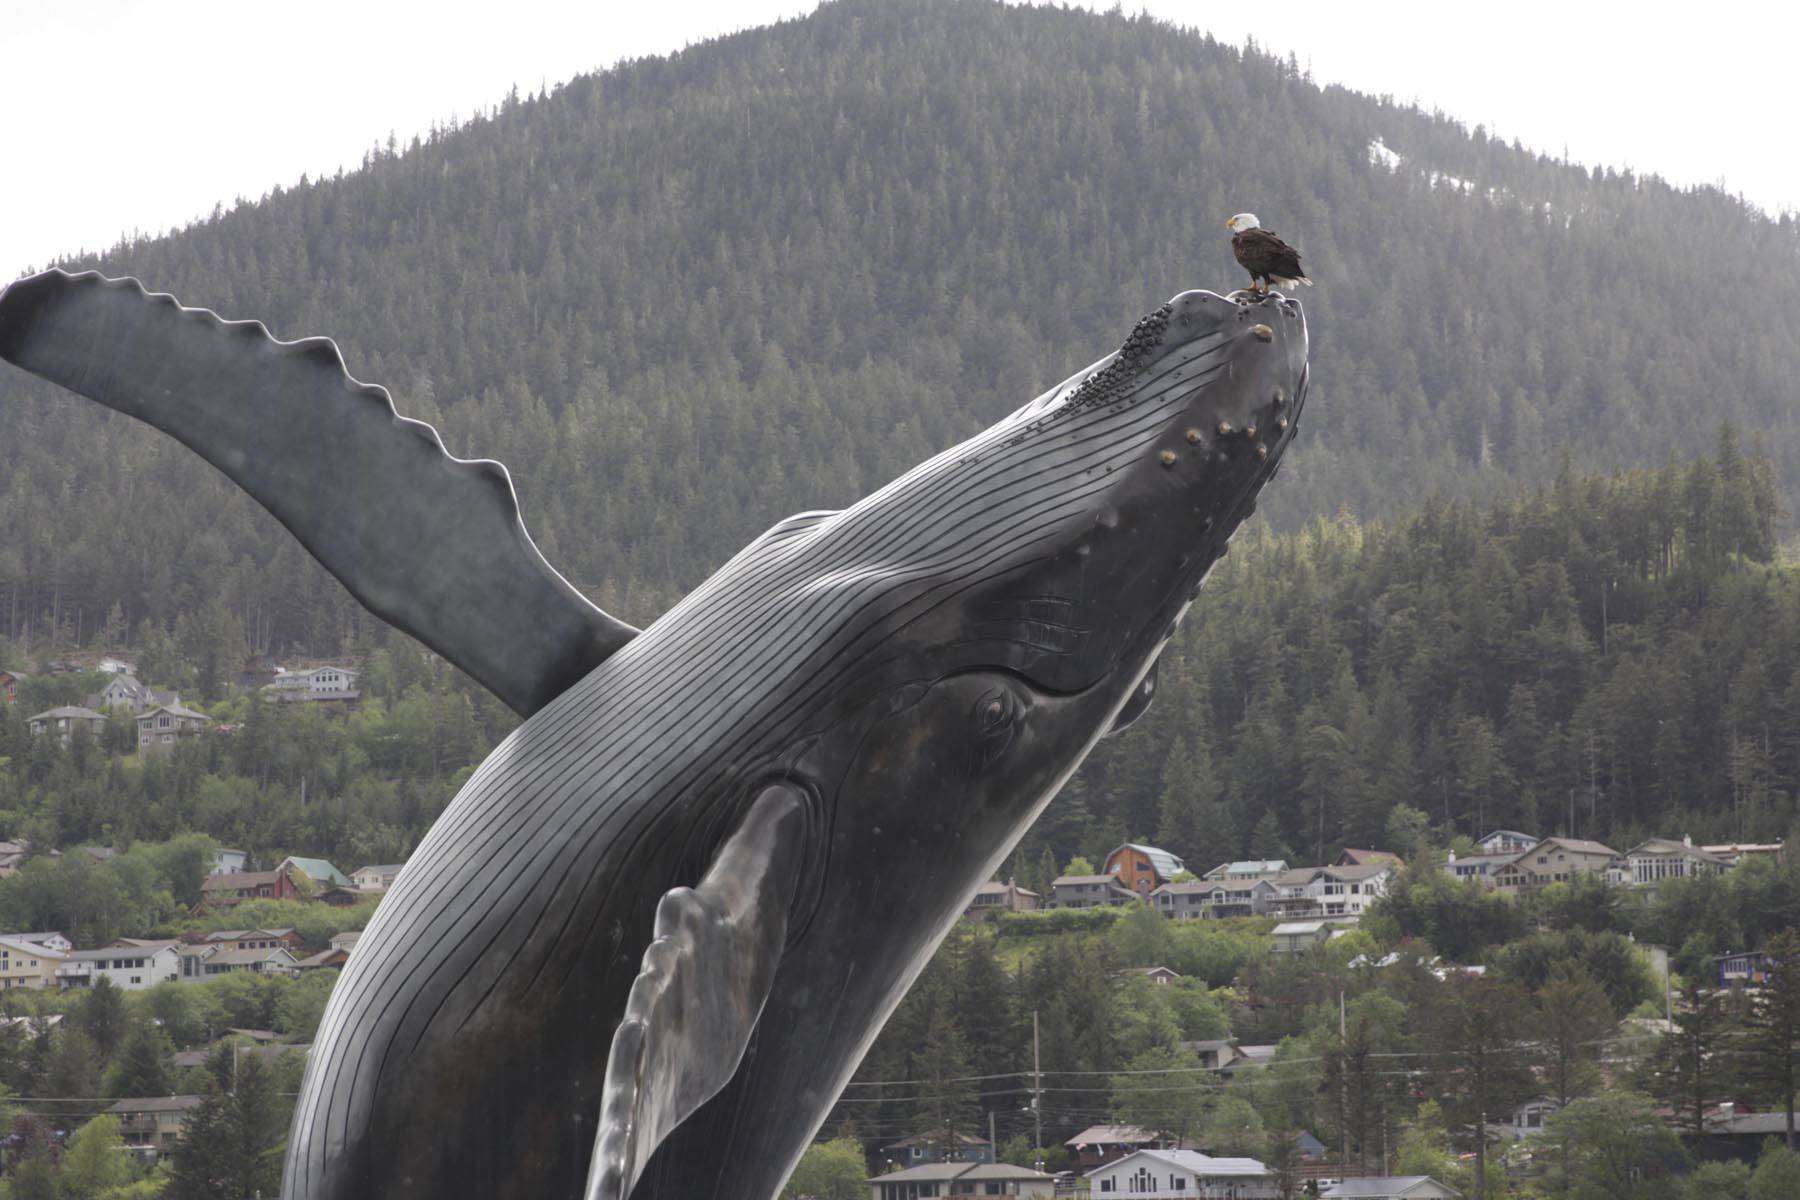 A bald eagle perches on top of the whale statue at Mayor Bill Overstreet Park on May 26, 2020. The pump rooms for the whale have been repaired after being damaged by flooding last October, but theywill remain turned off for now to save costs and discourage gatherings. (Michael S. Lockett | Juneau Empire)